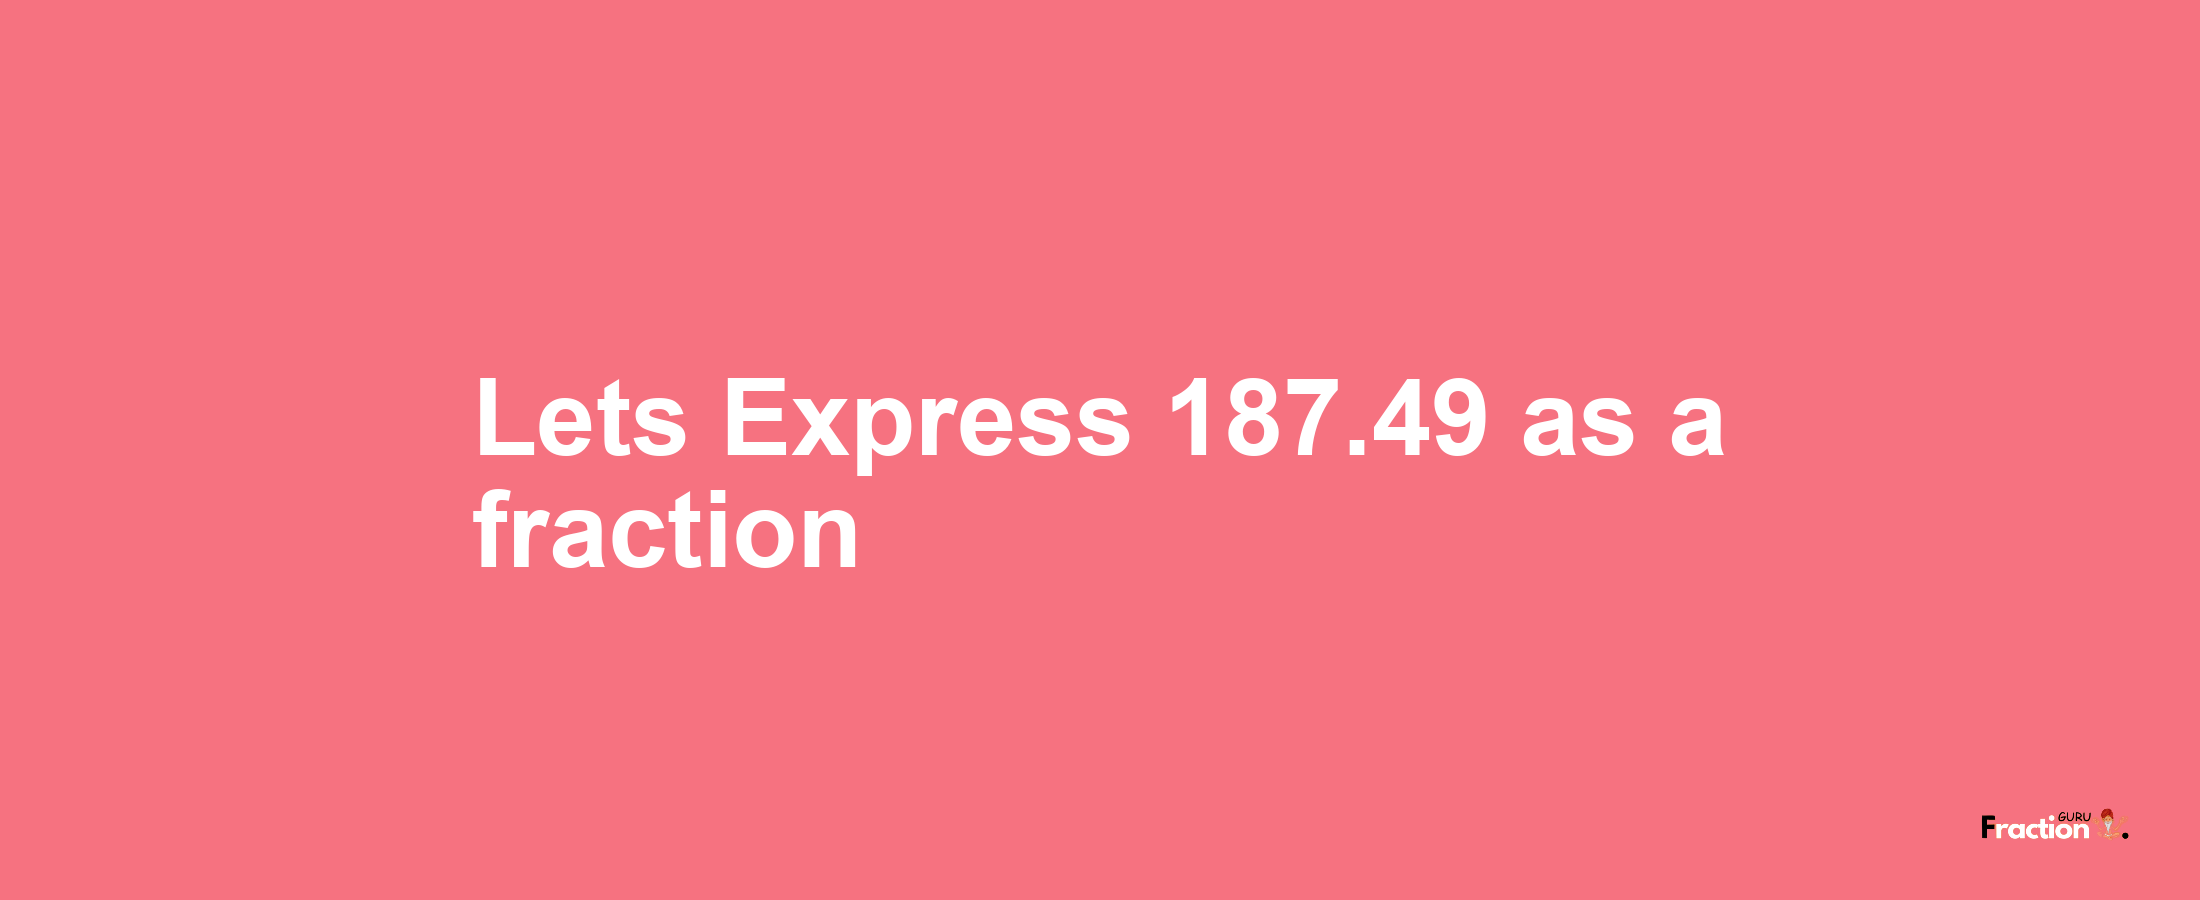 Lets Express 187.49 as afraction